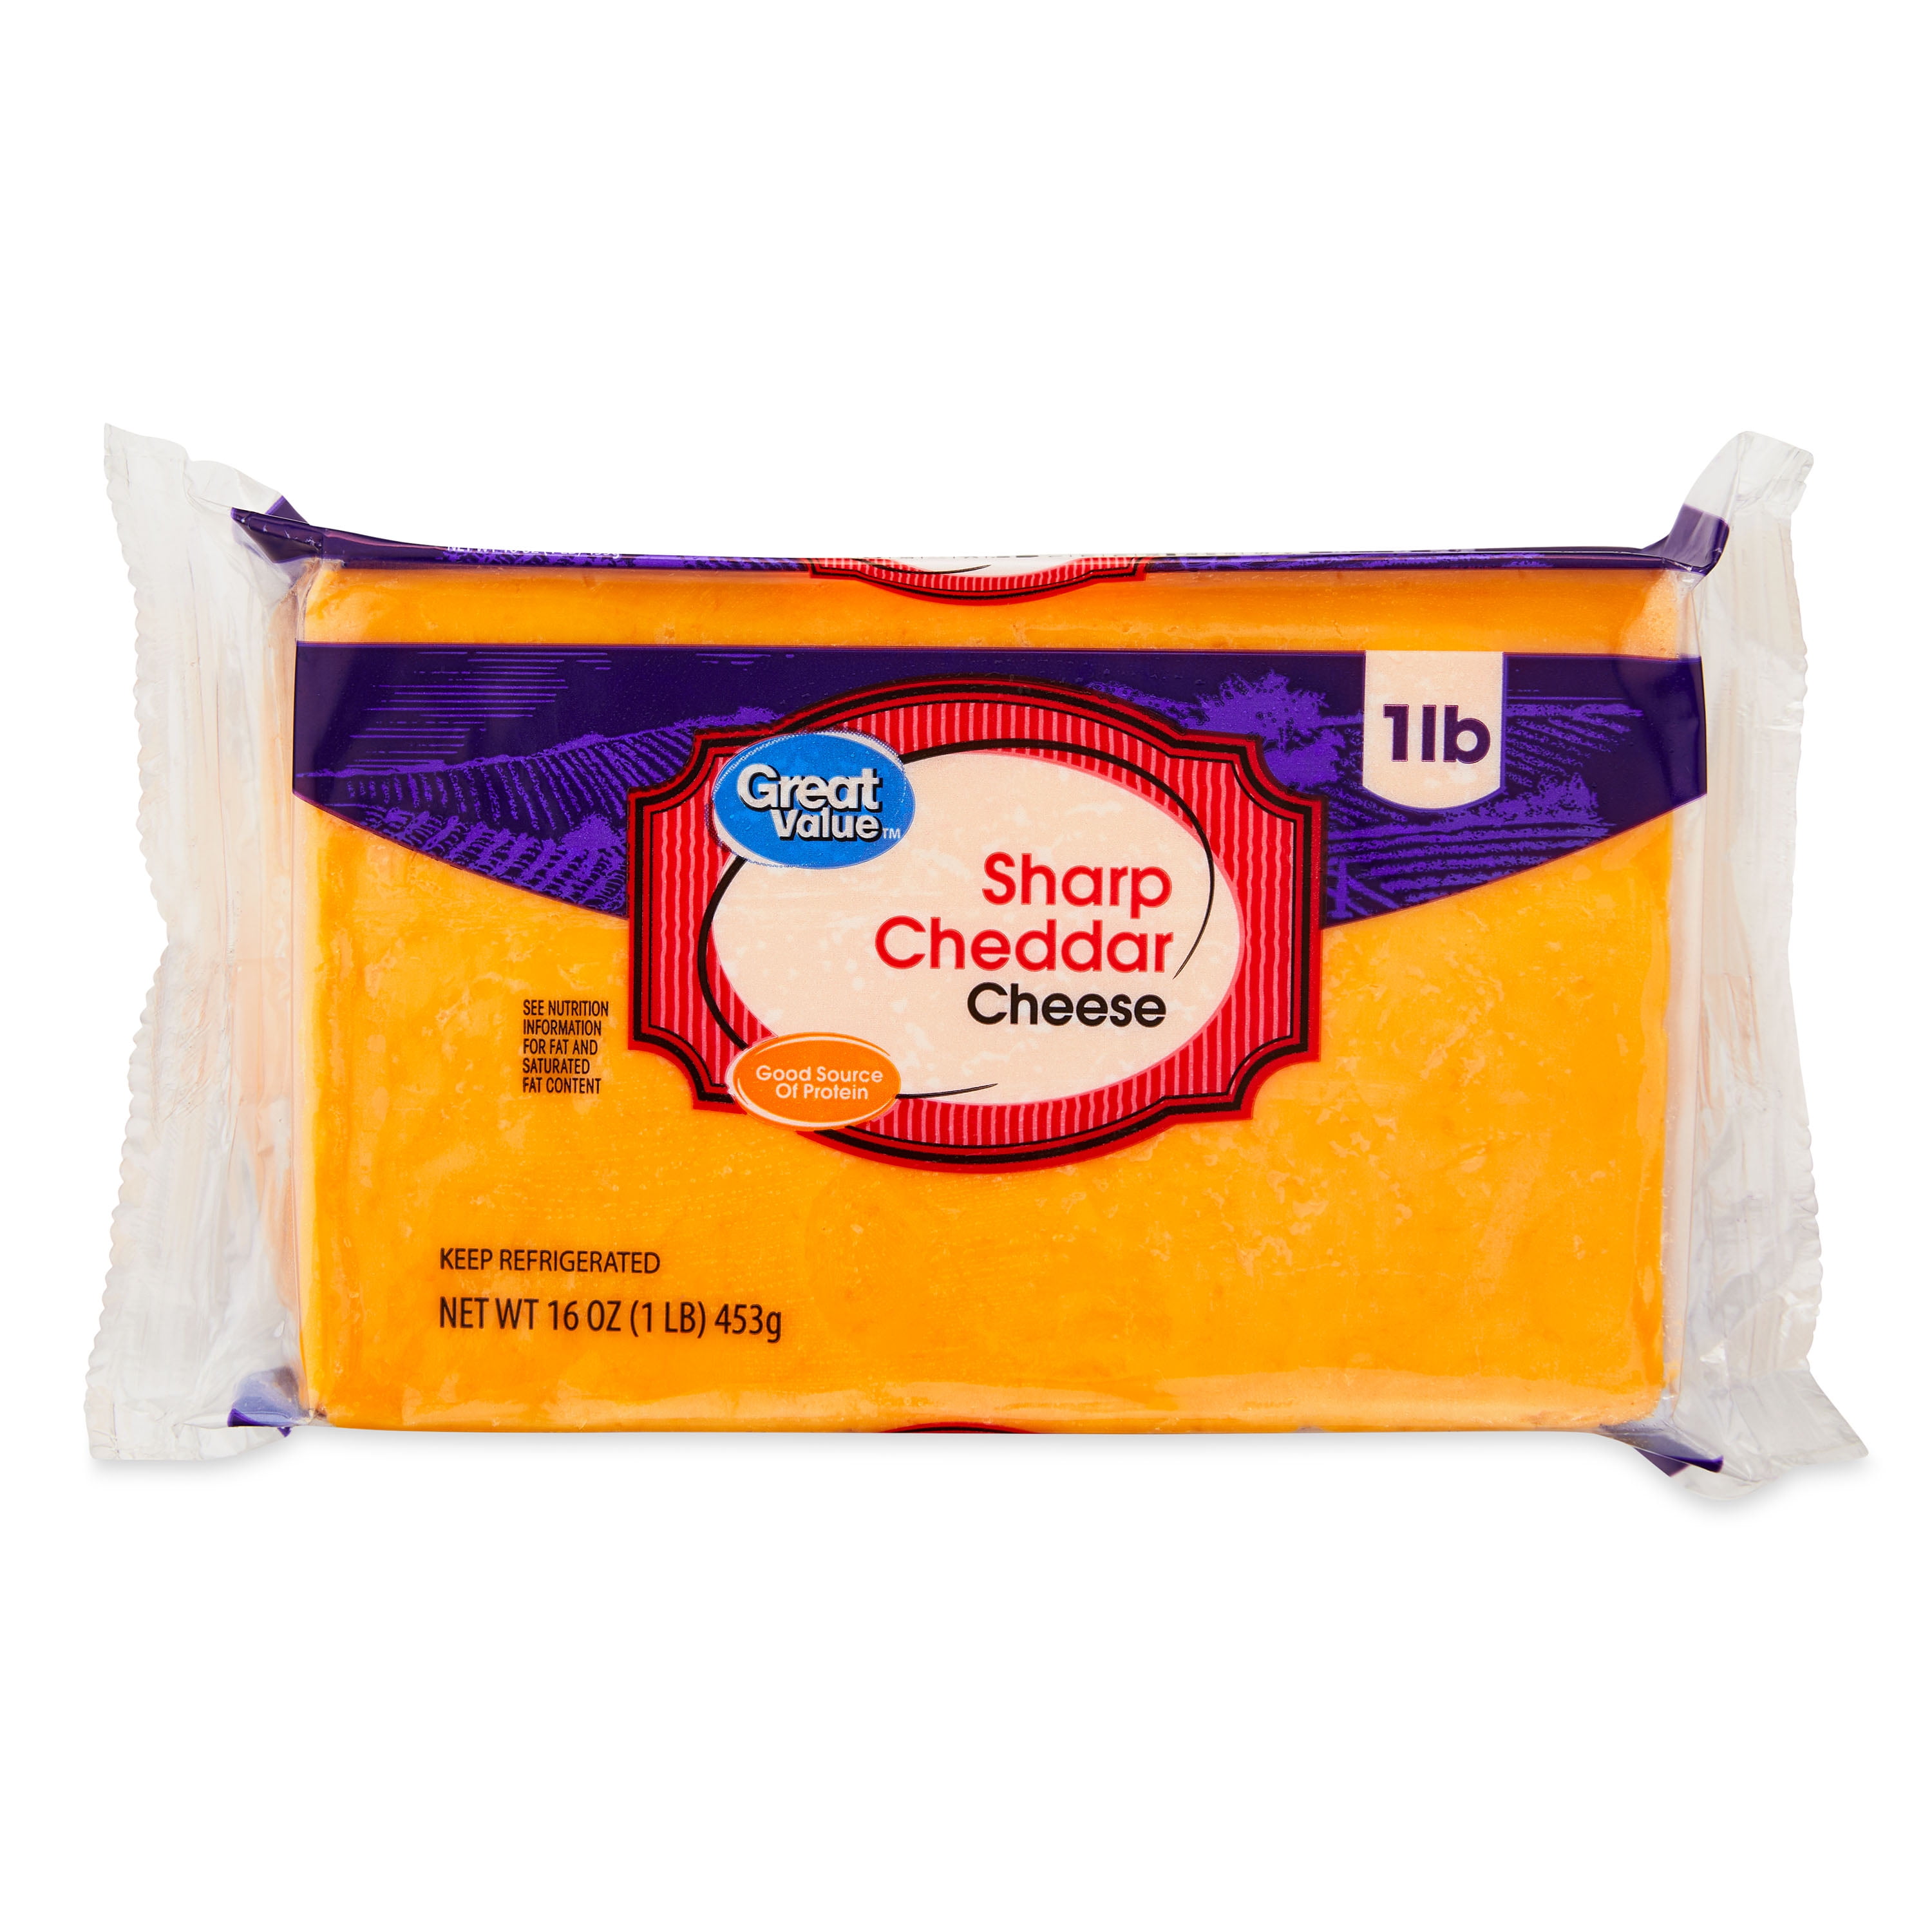 Great Value Sharp Cheddar Cheese, 16 oz